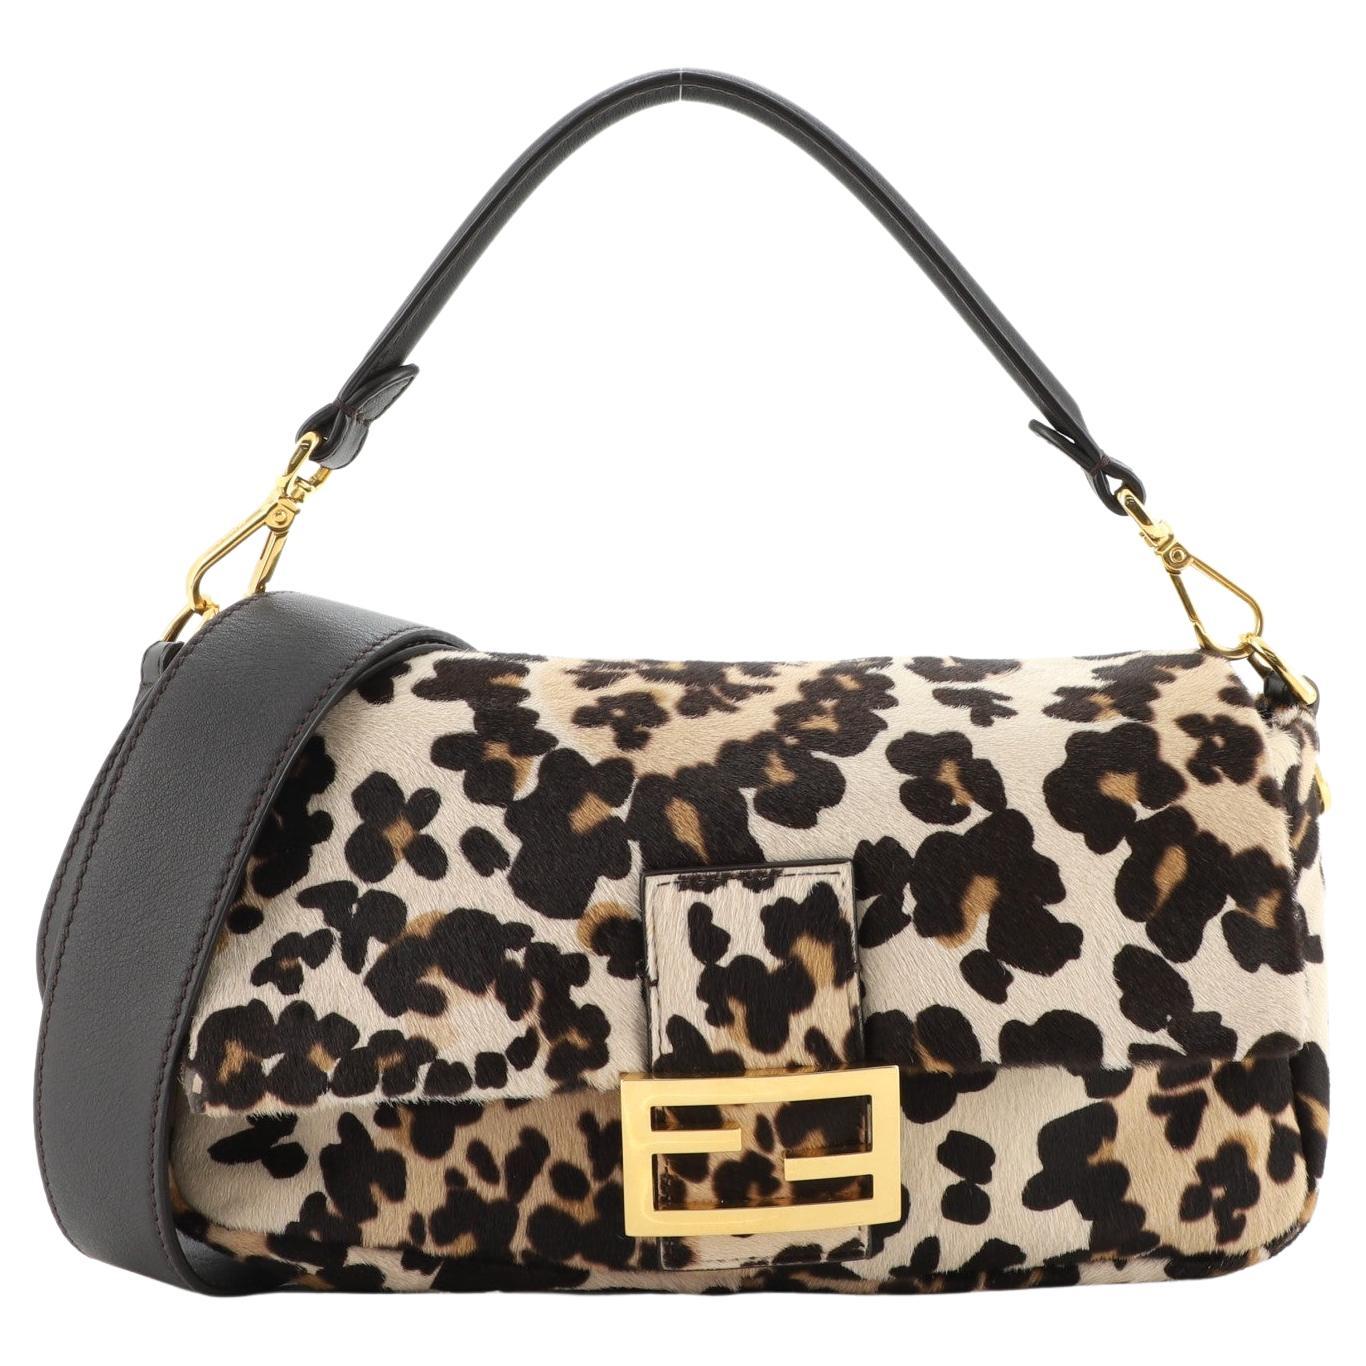 Vintage Fendi: Bags, Clothing & More - 2,502 For Sale at 1stdibs